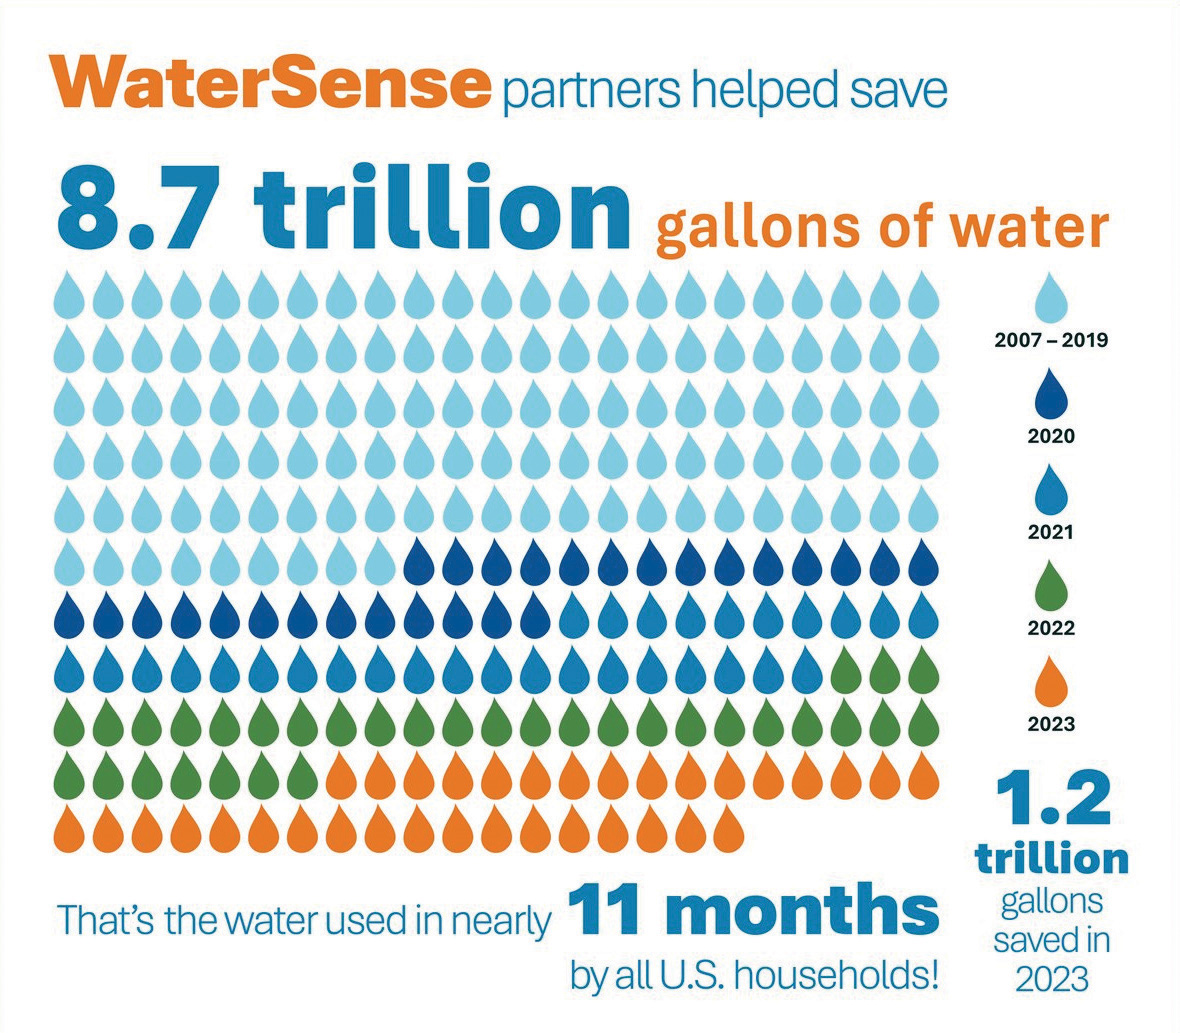 WaterSense partners helped save 8.7 trillion gallons of water. That's the water used in neary 11 months by all U.S. households! 1.2 trillion gallons saved in 2023